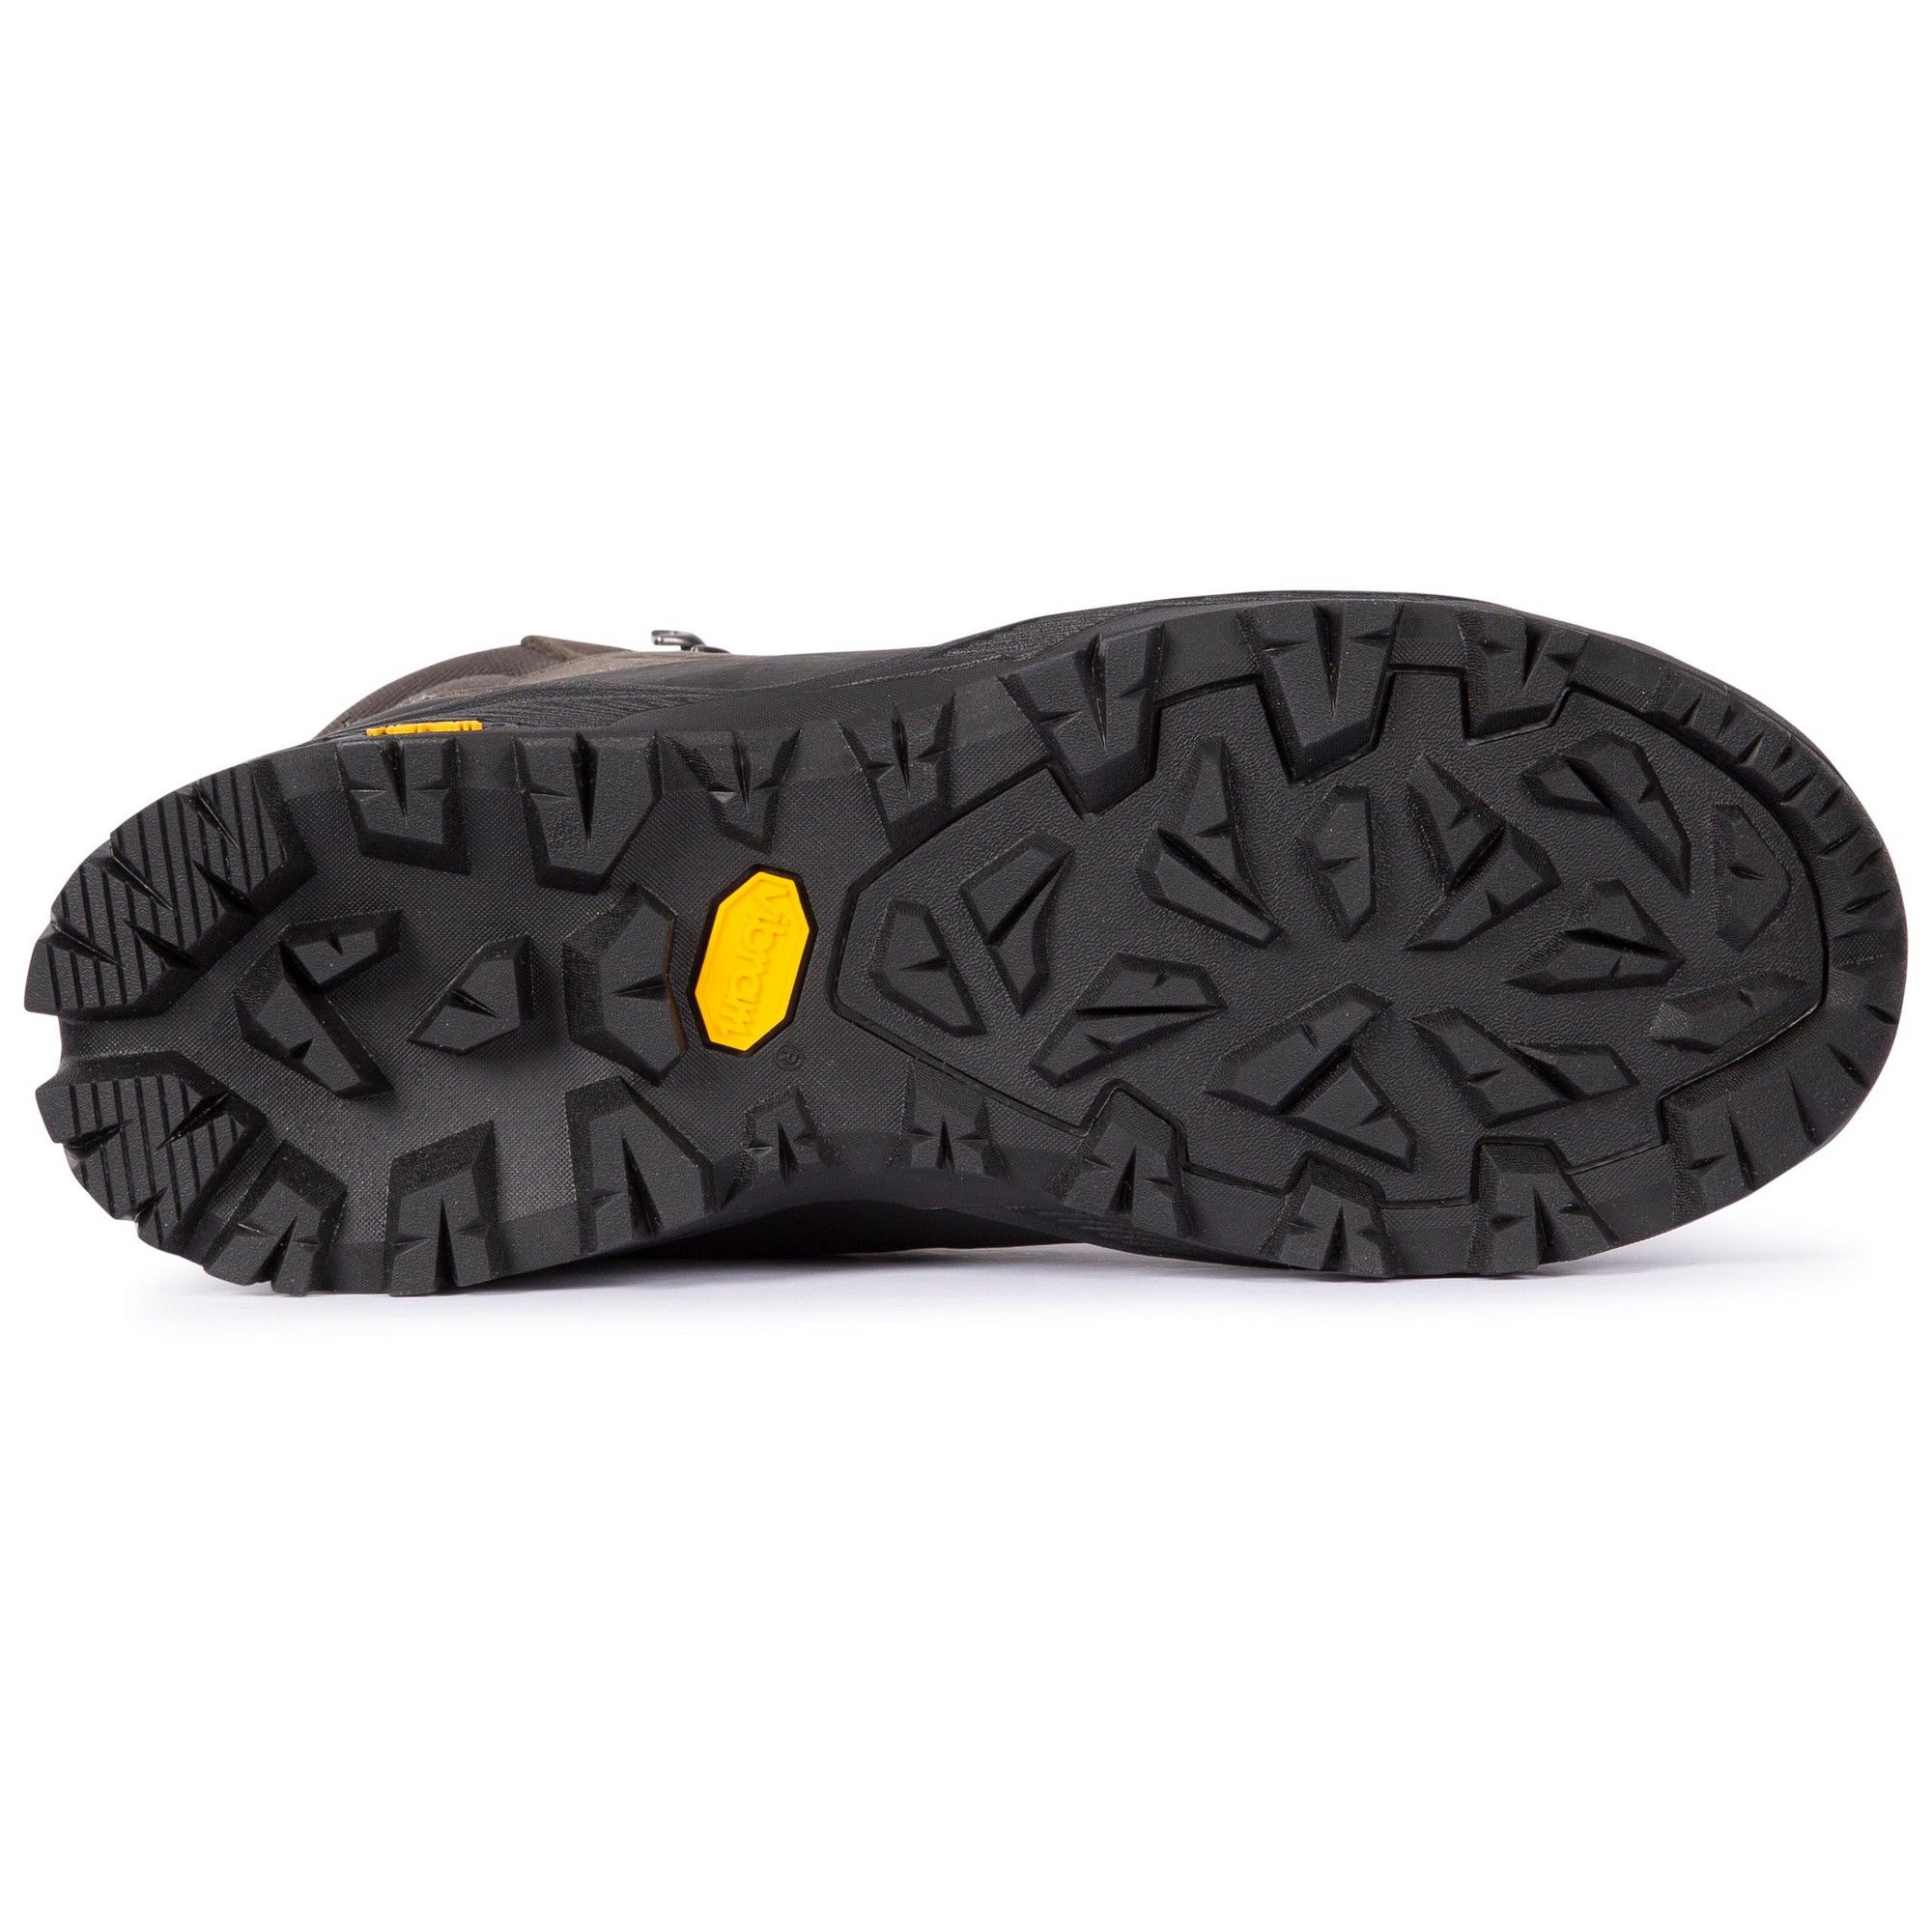 Upper: Full Grain Leather, Rubber, Textile. Lining: Textile. Insole: Cushioned. Outsole: Rubber, Vibram. 8 Eyelets. Fabric Technology: Breathable, DLX, Lightweight, Shock Absorbing, Waterproof. Gusseted Tongue, Moulded Footbed, Padded Collar. Flat Heel. Cut: Ankle High. Design: Logo, Textured. Toe Style: Round. Fastening: Lace Up.